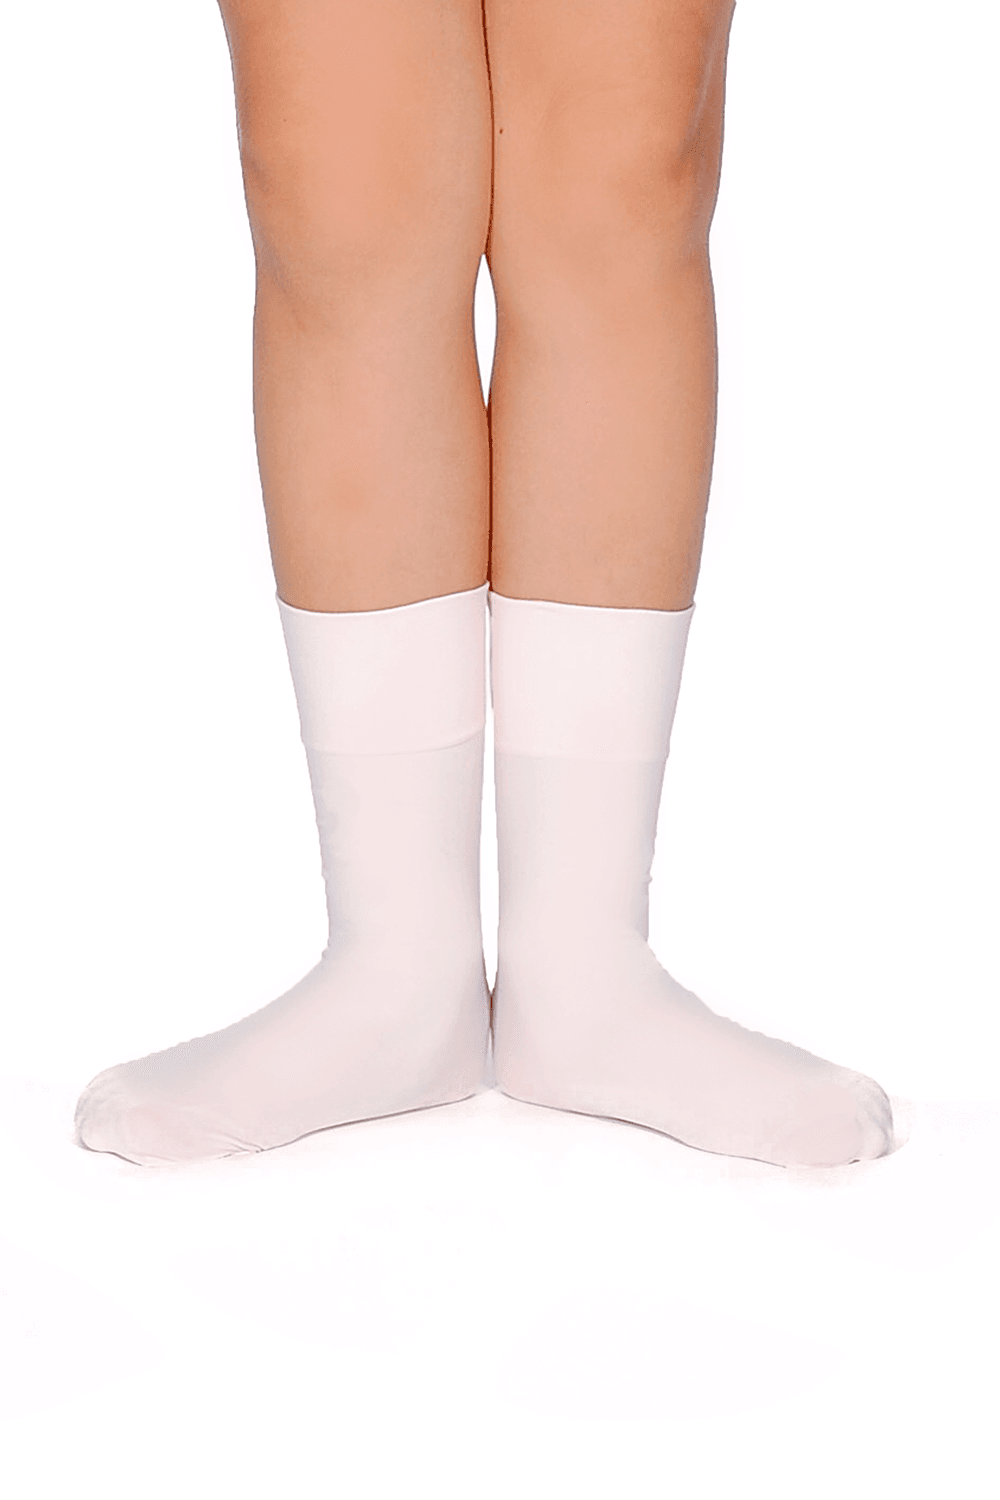 Roch Valley - Tox Socks – Pose.A Pointes